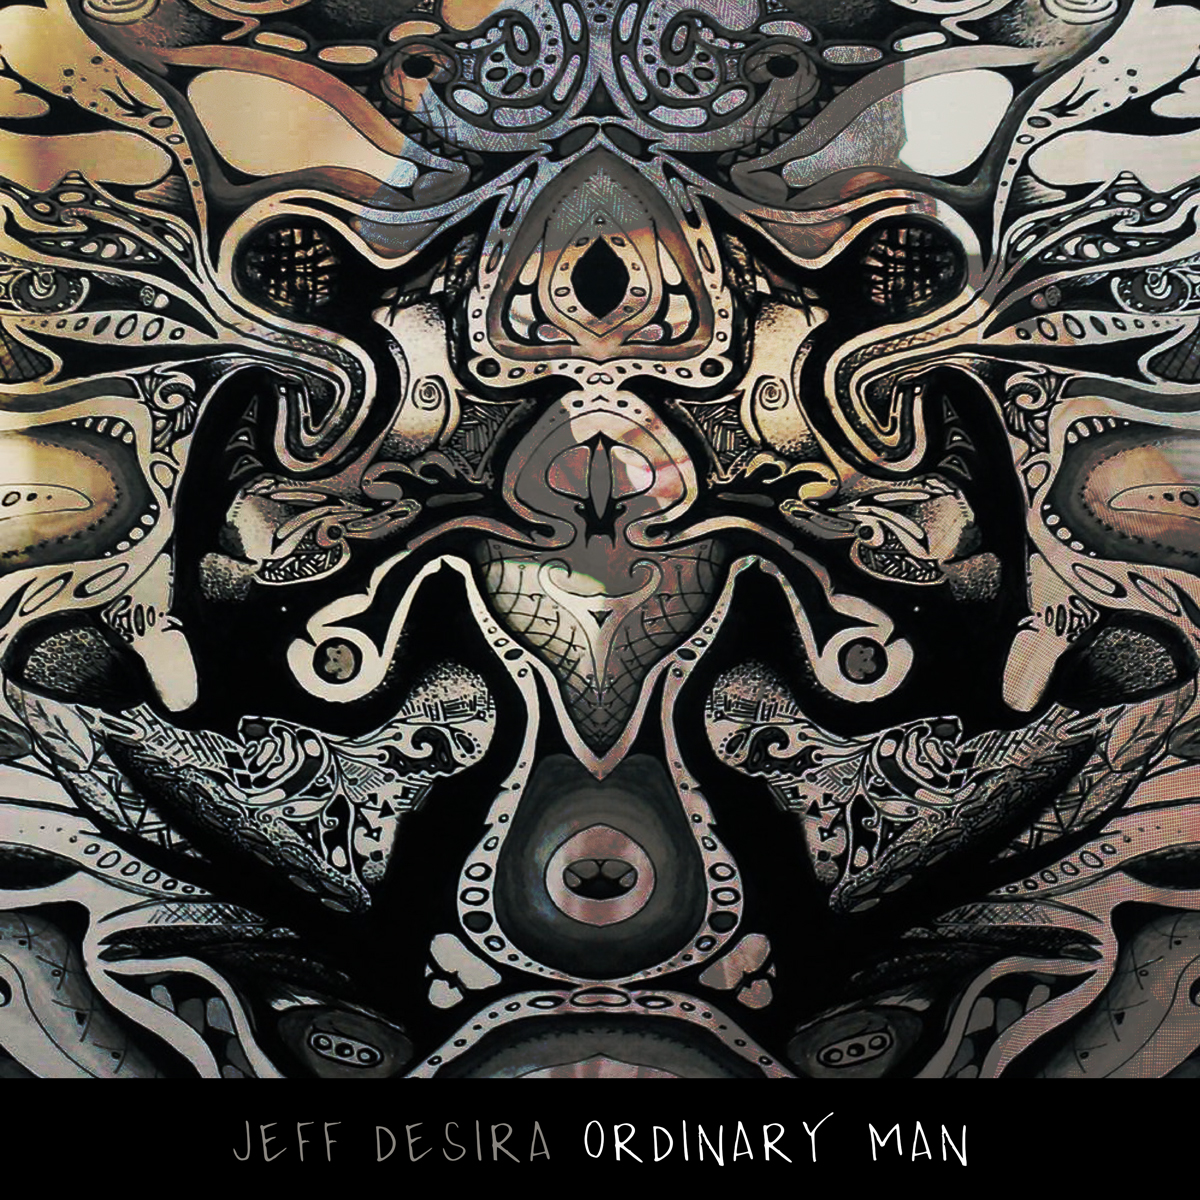 Client: Jeff Desira, singer-songwriter from San Francisco. Description: Designed the layout for the online release of Jeff Desira's single Ordinary Man. Featuring artwork that his daughter created.